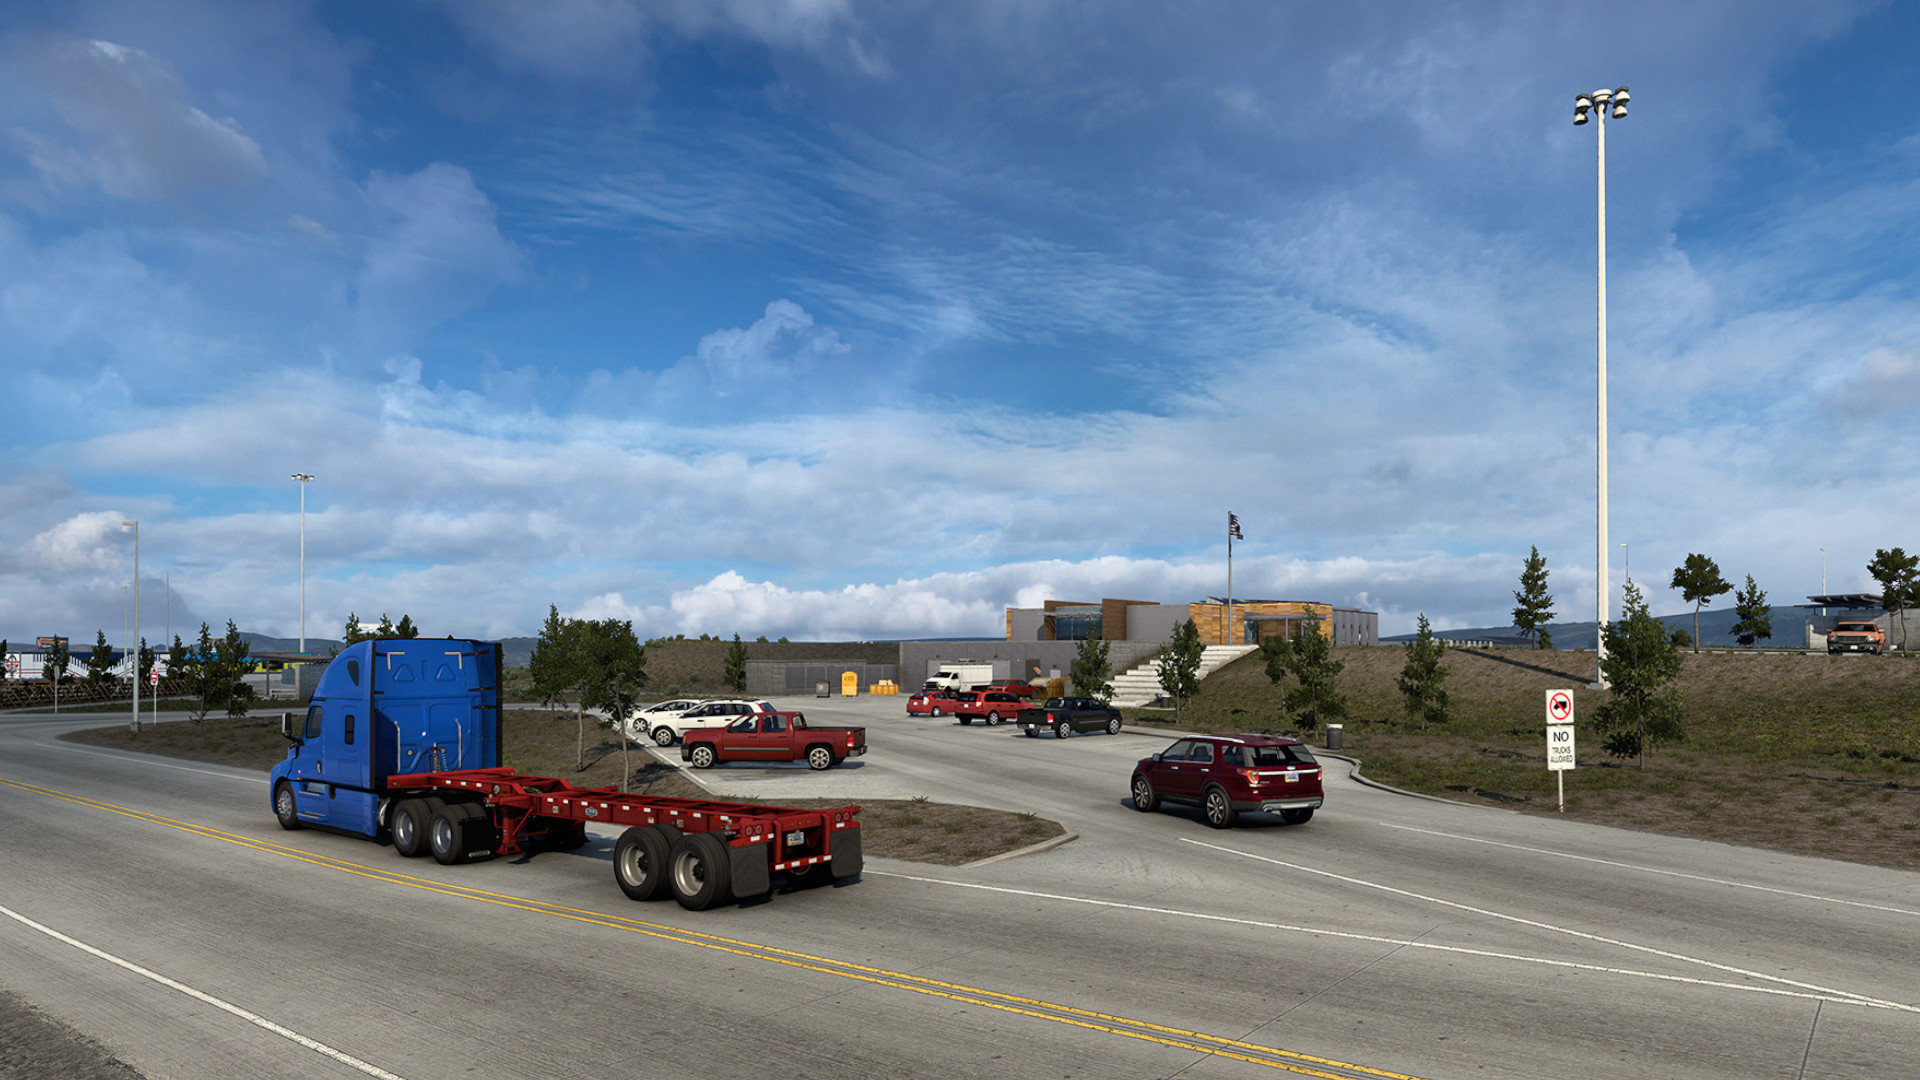 Here’s what Wyoming’s $16 million rest stop looks like in American Truck Simulator